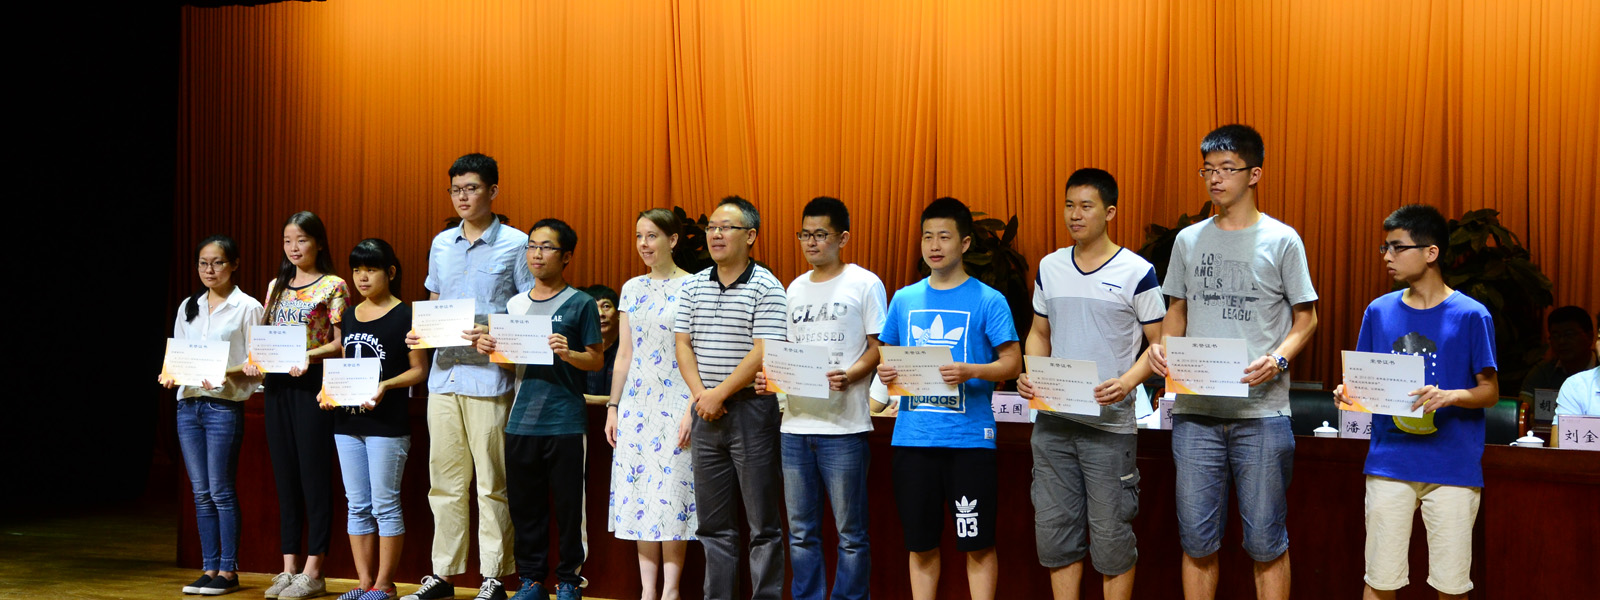 INVISTA Scholarship, Talent Forum at South China University of Technology cultivates local talent